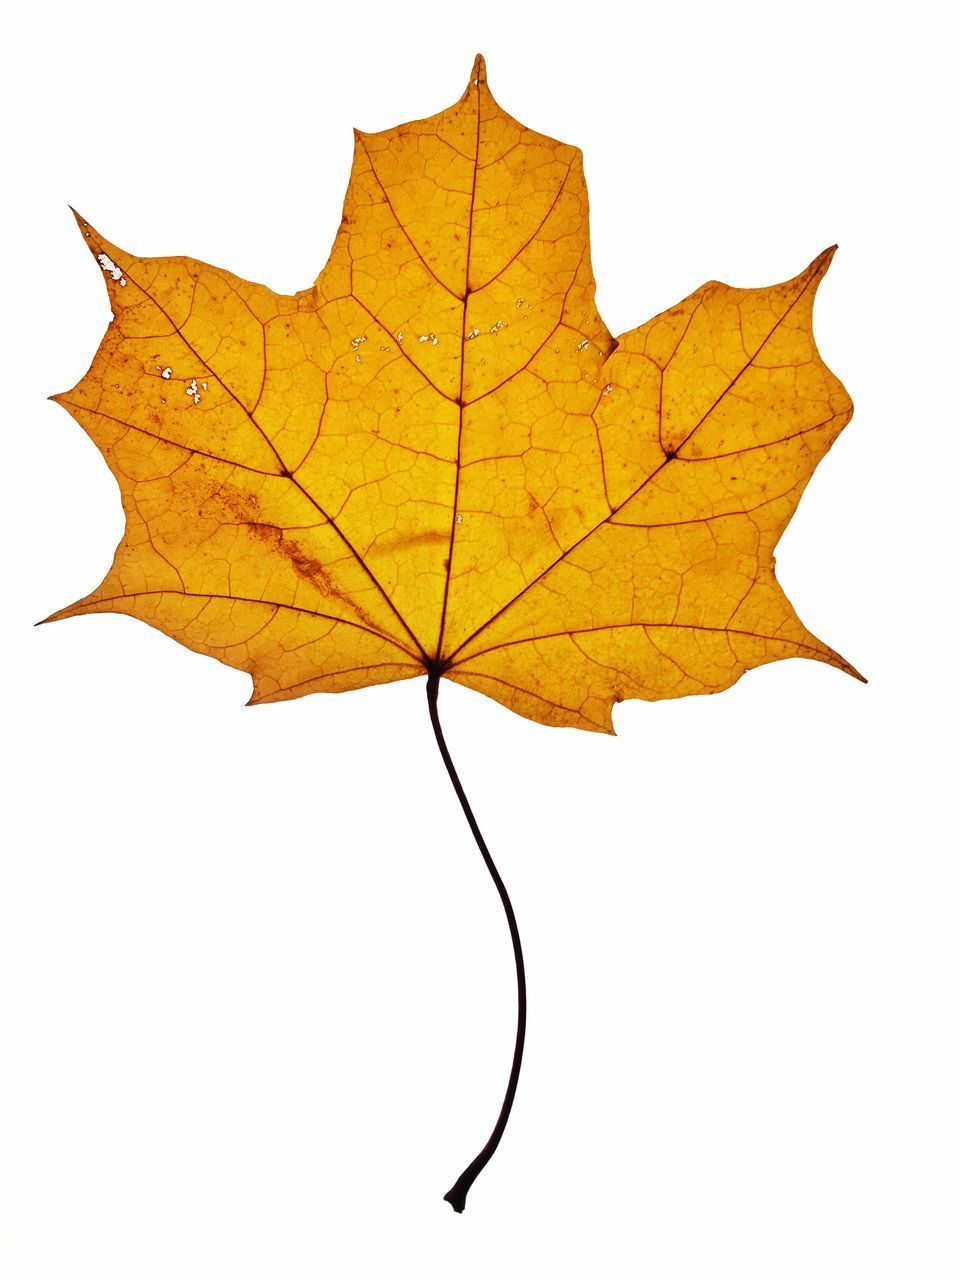 CLOSE-UP OF YELLOW MAPLE LEAF ON WHITE BACKGROUND